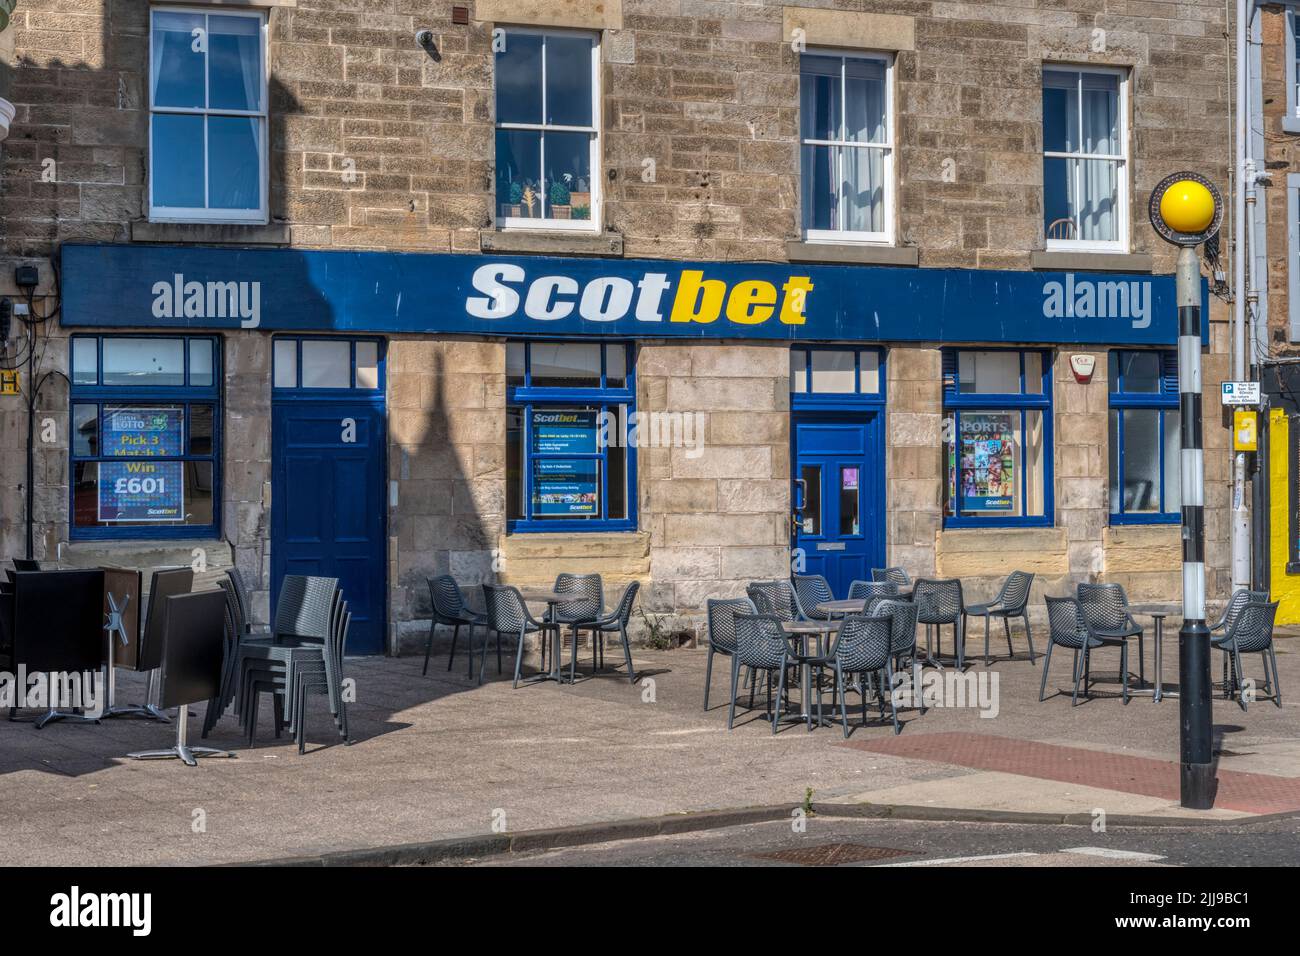 Scotbet betting shop in Anstruther, Fife. Stock Photo